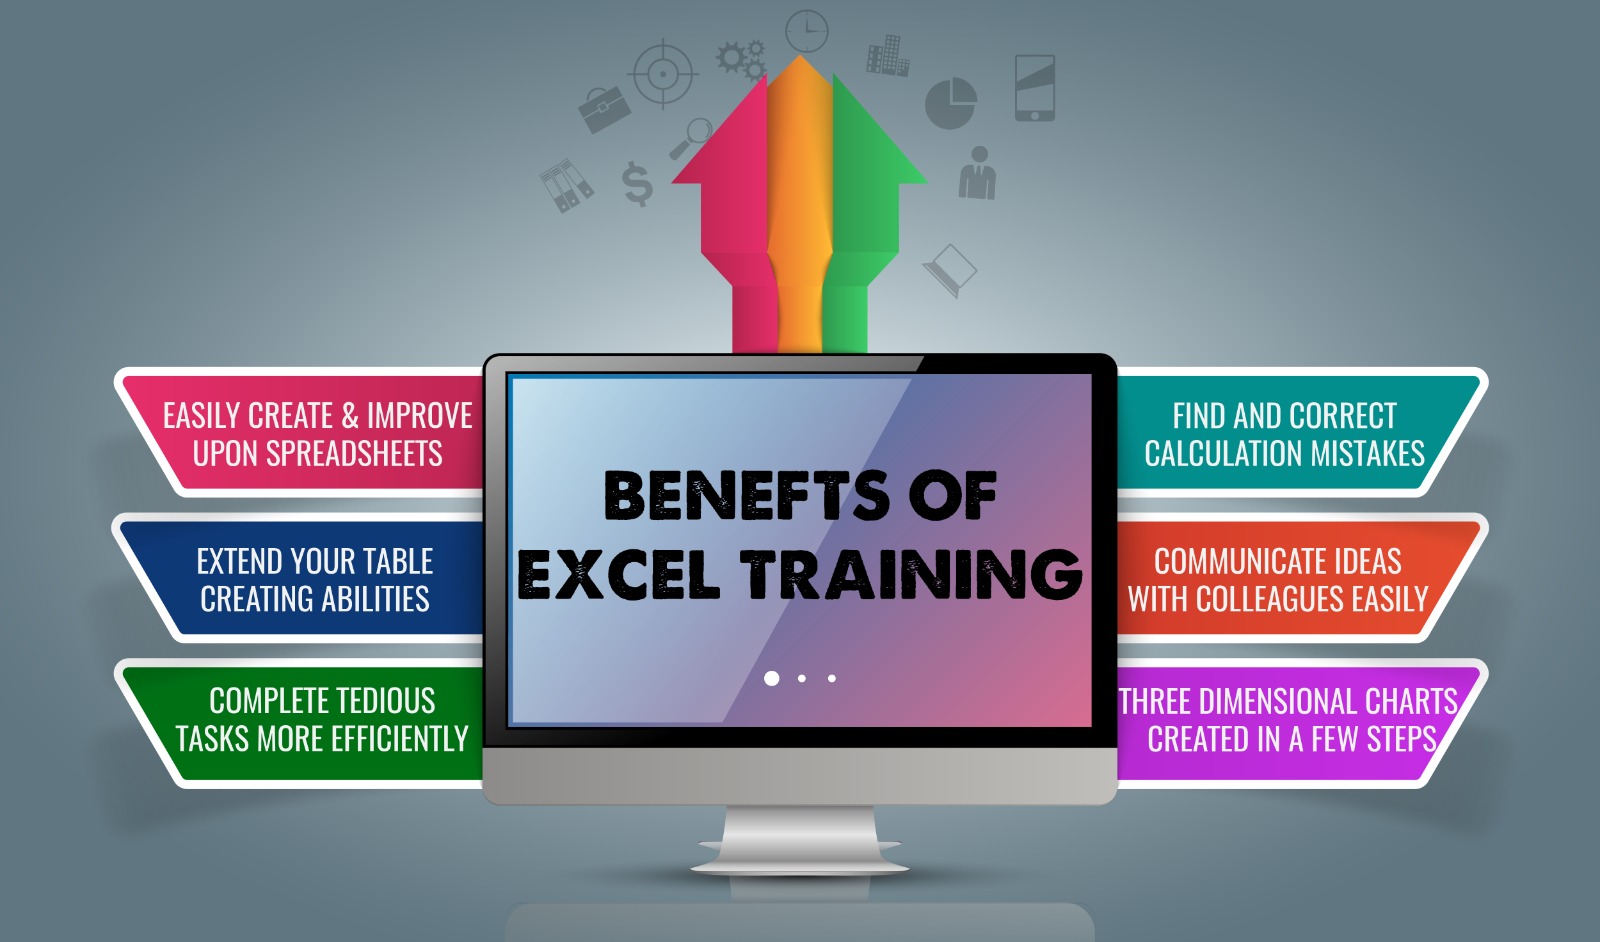 "Infographic highlighting the key benefits of advanced Excel training, featuring icons and brief descriptions for each benefit such as enhanced data analysis capabilities, improved productivity, mastery of complex functions and formulas, better data visualization techniques, and increased efficiency in spreadsheet management."